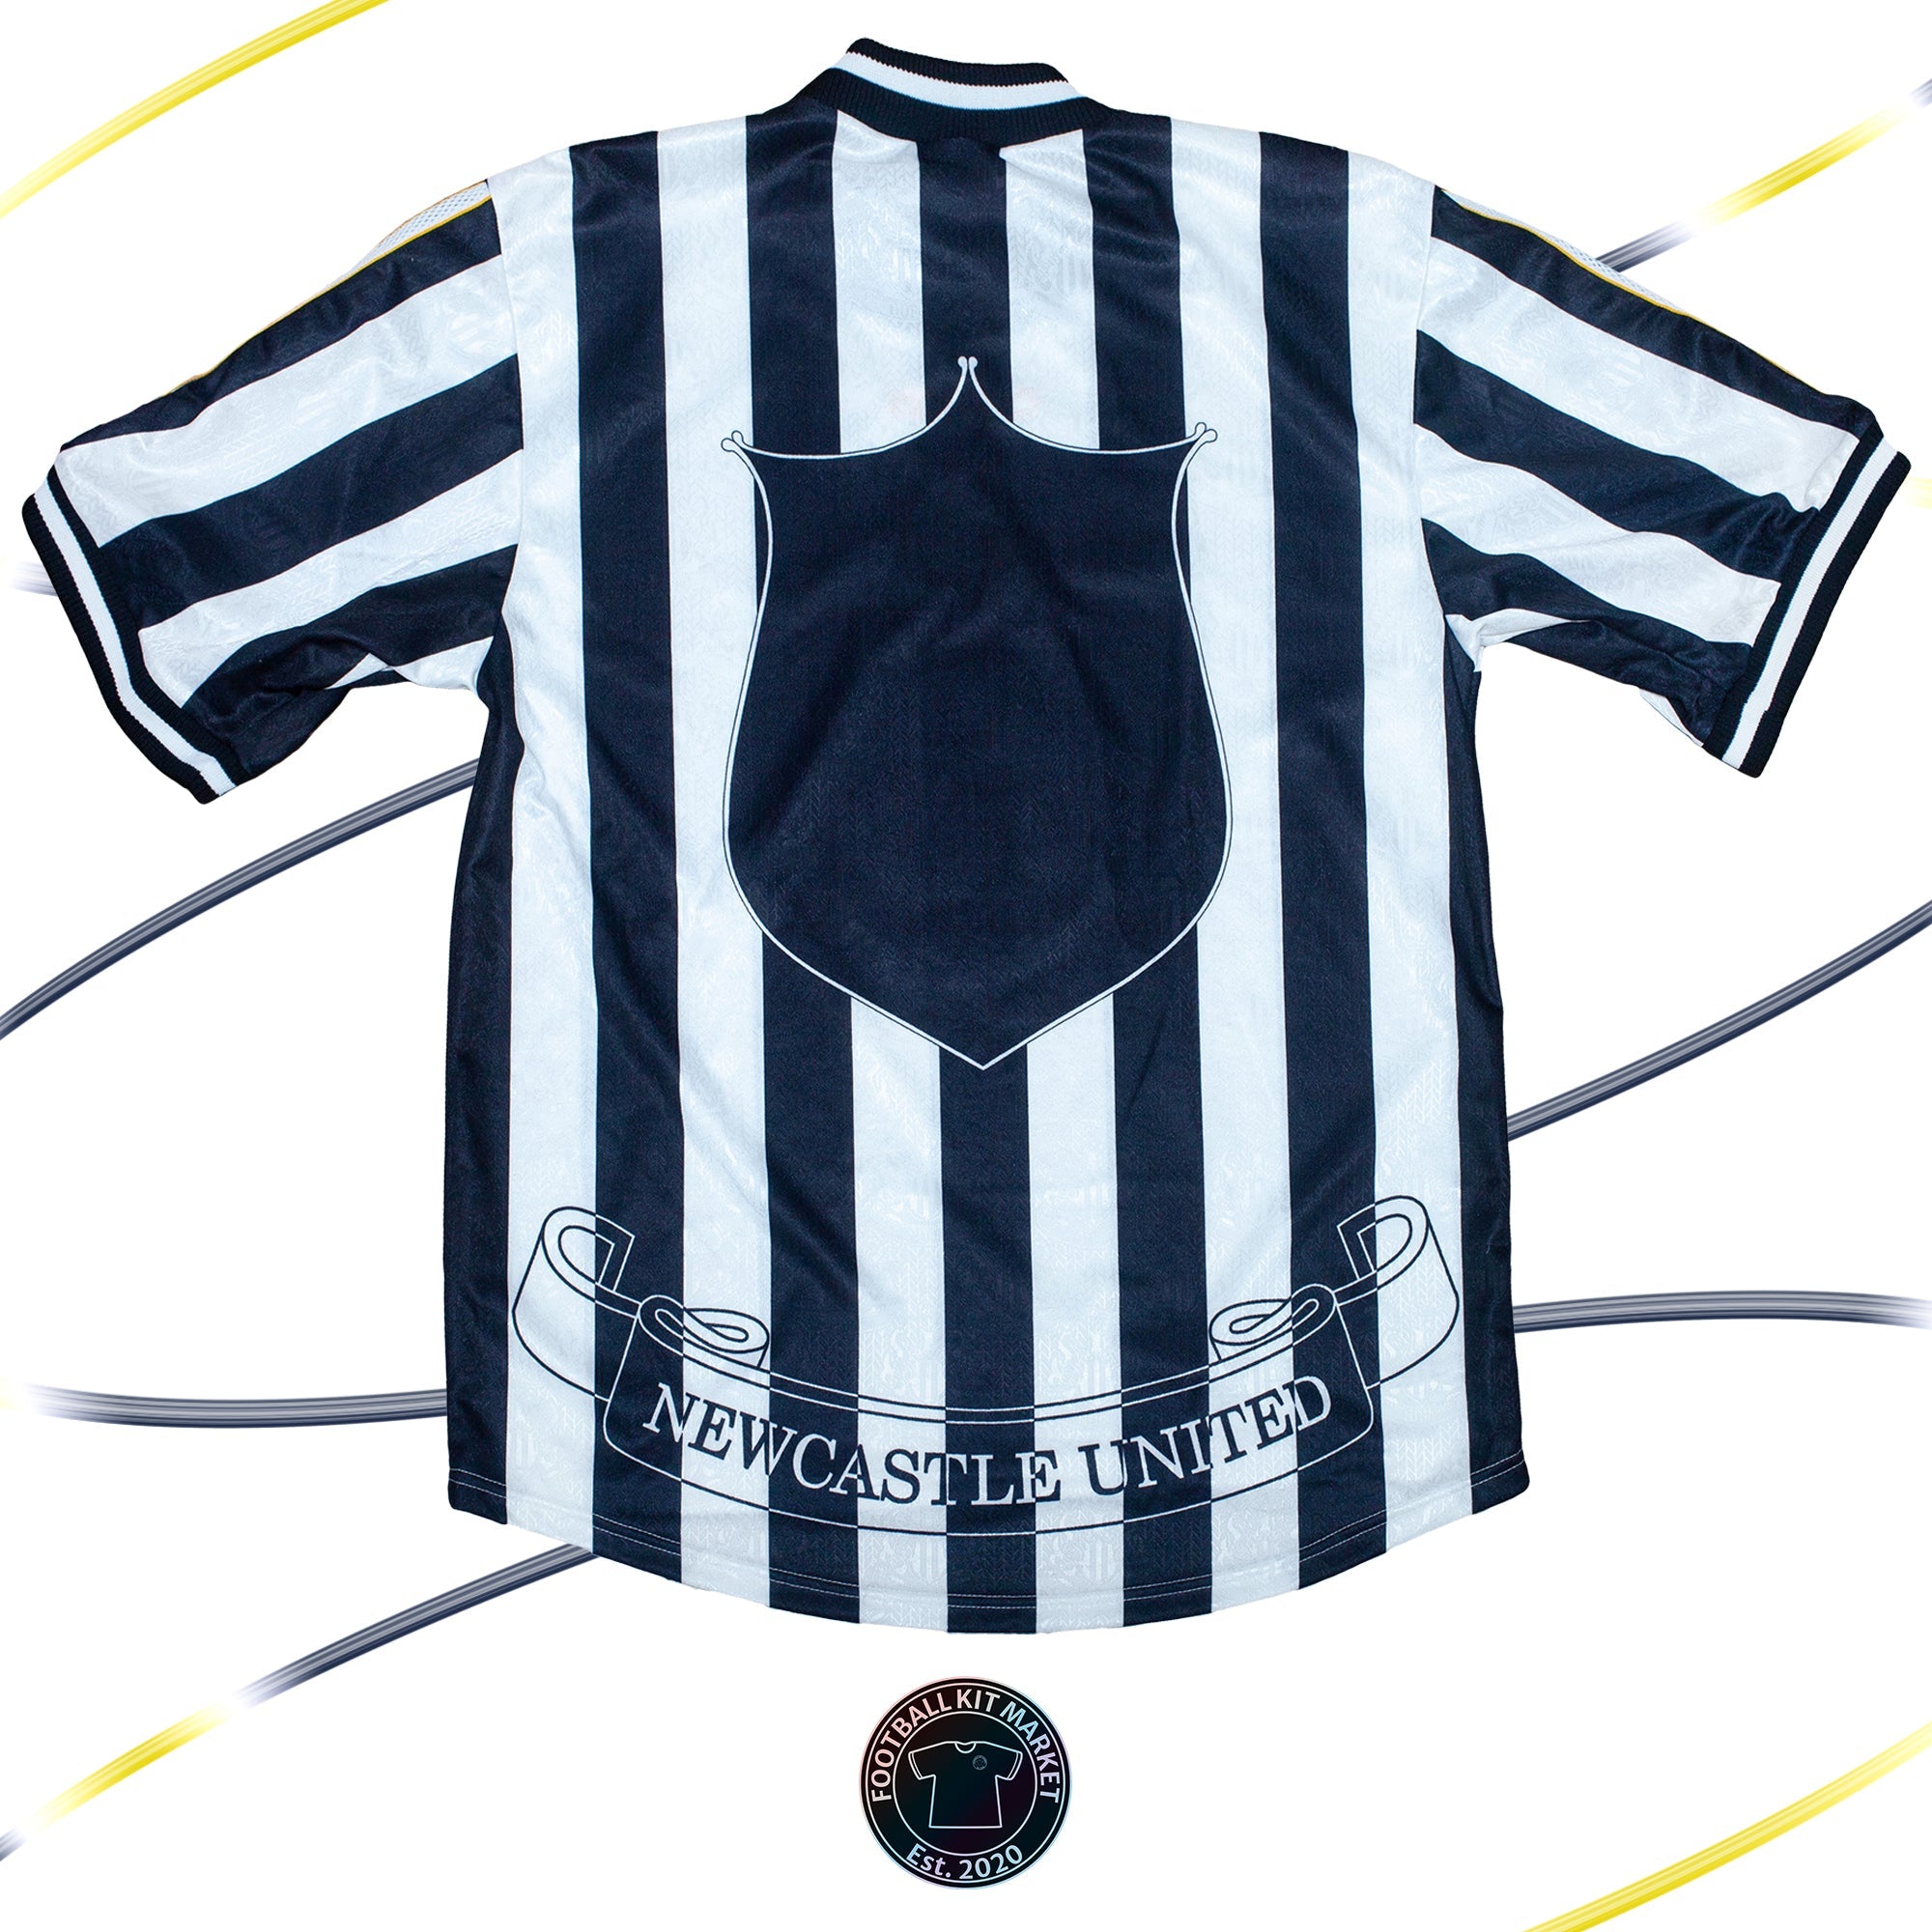 Genuine NEWCASTLE UNITED Home (1997-1998) - ADIDAS (XL) - Product Image from Football Kit Market